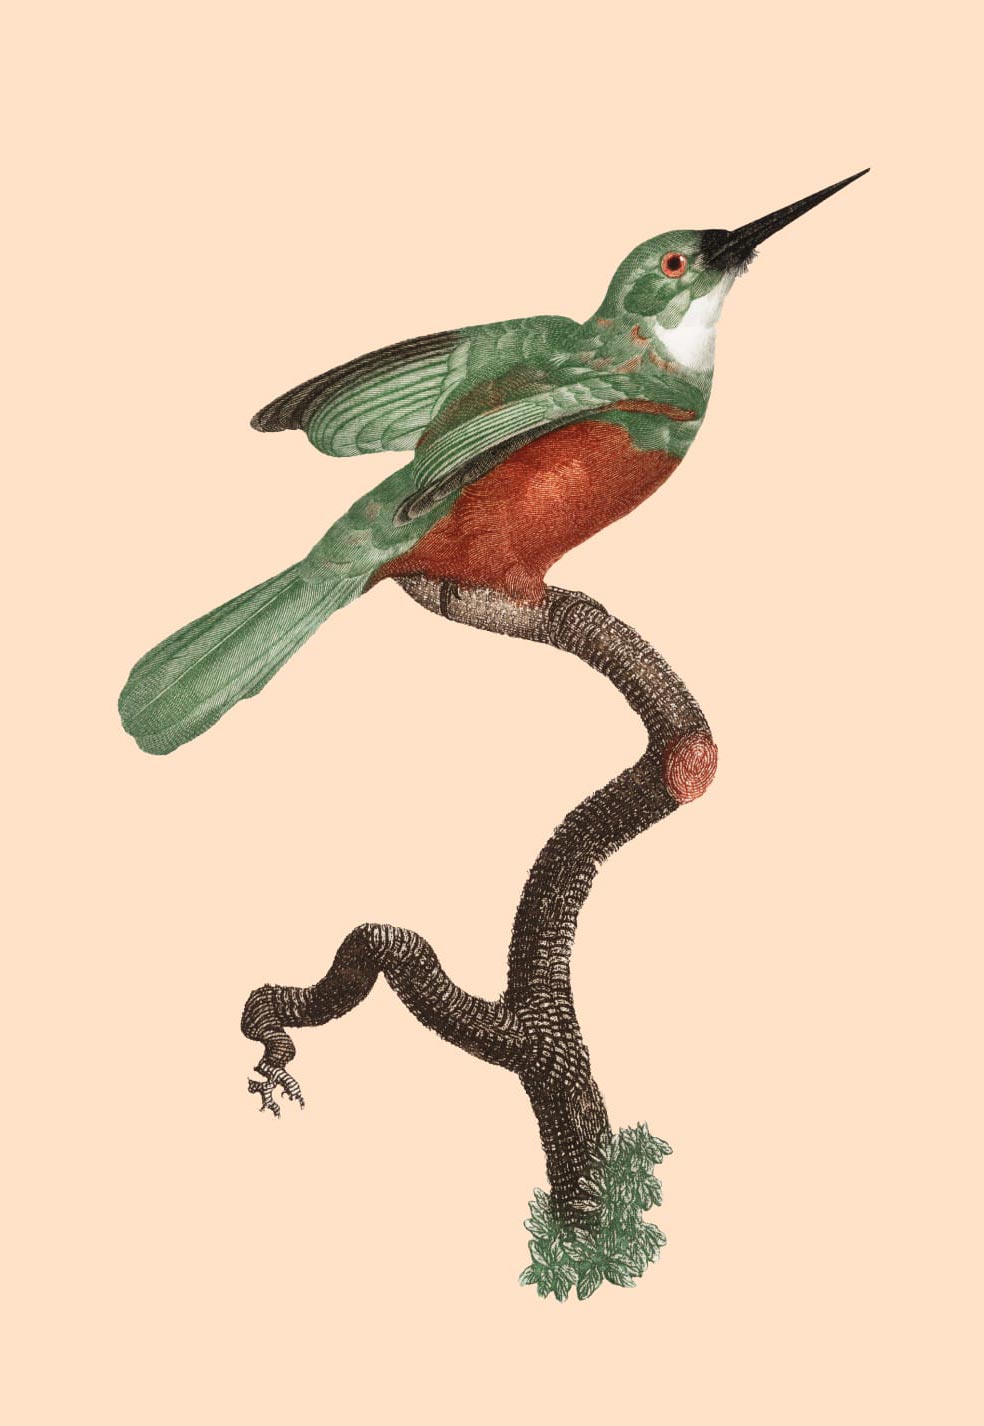 Image of a bird on a branch